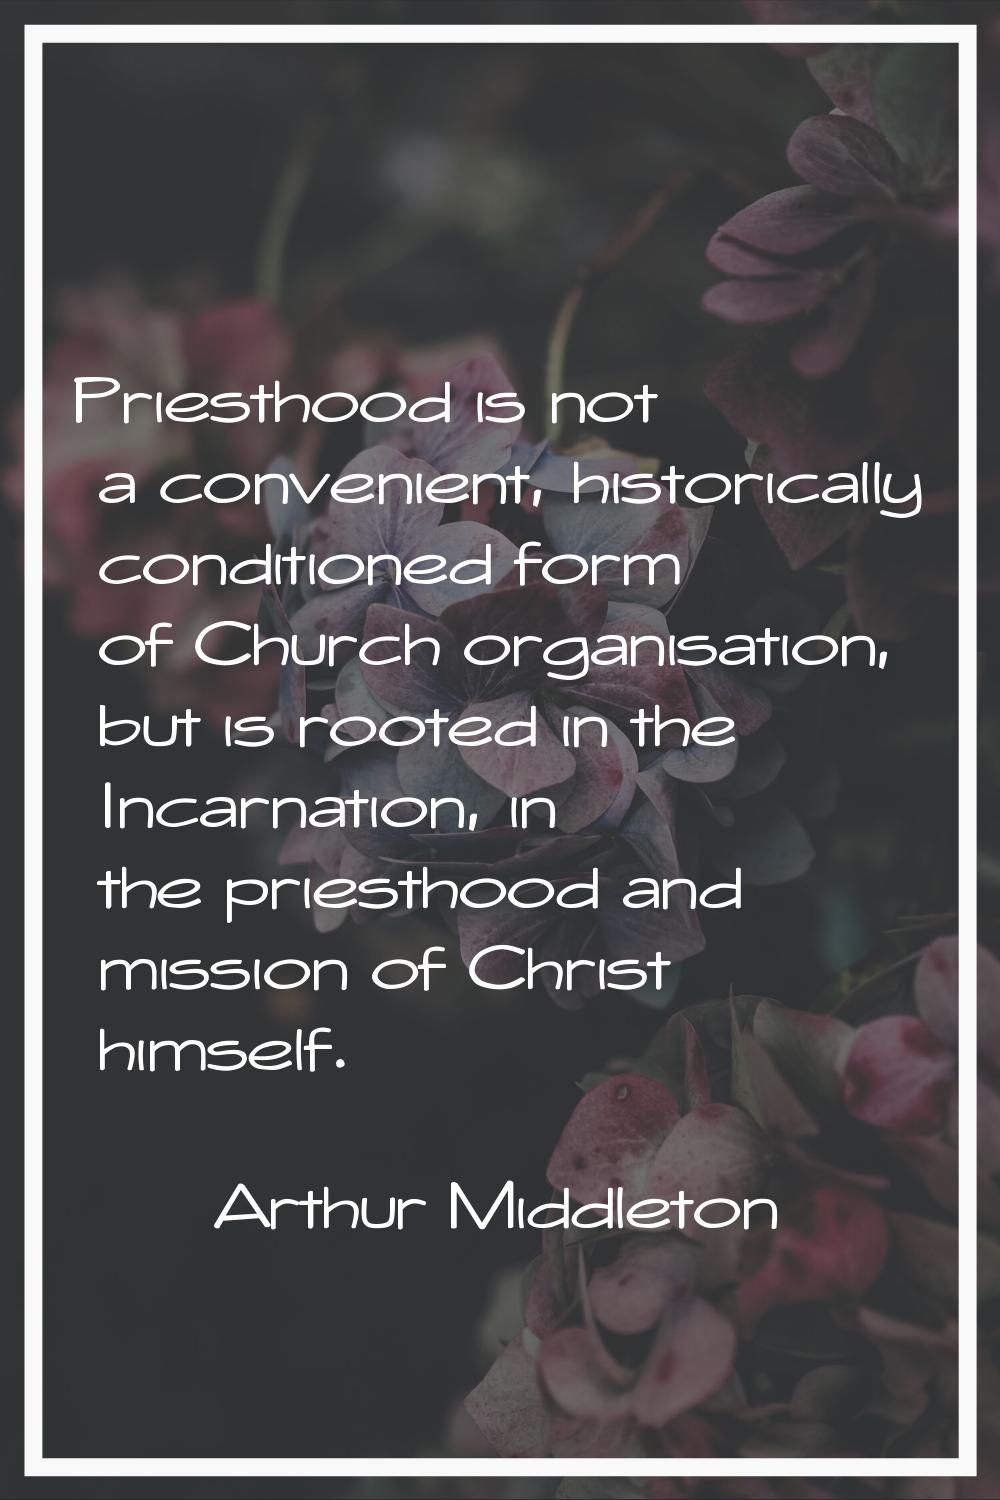 Priesthood is not a convenient, historically conditioned form of Church organisation, but is rooted